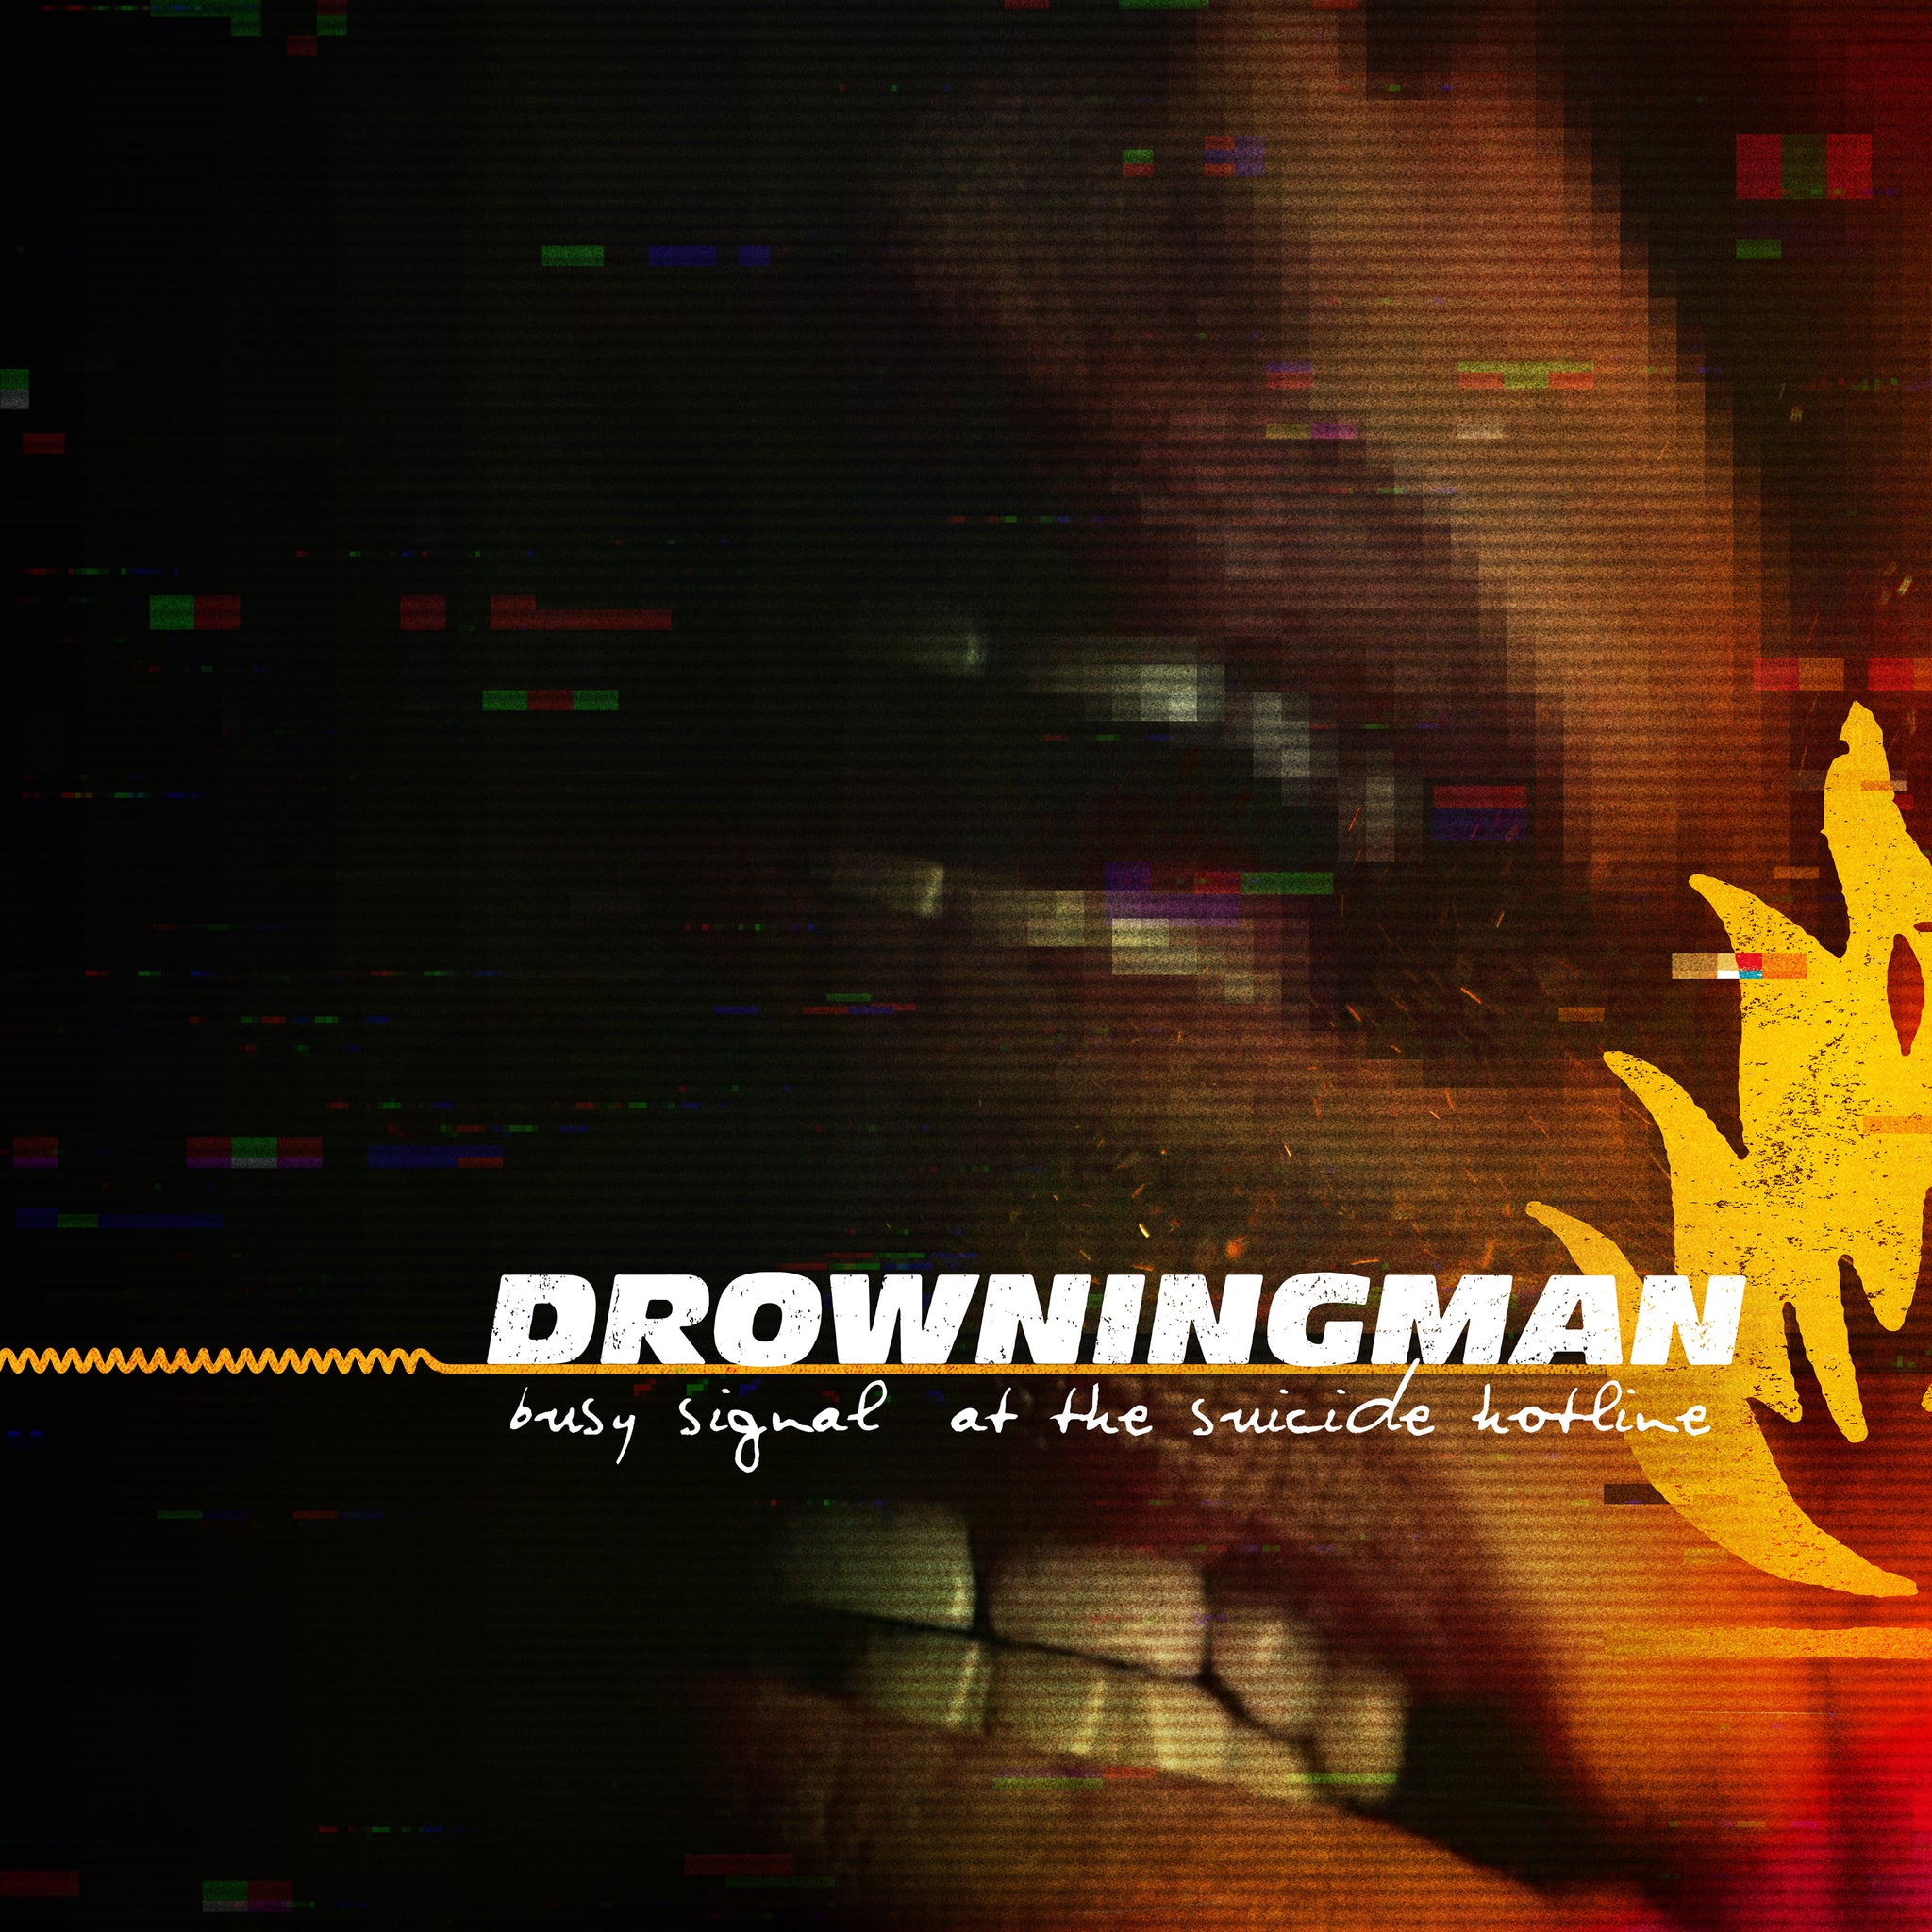 Drowningman - Busy Signal at the Suicide Hotline